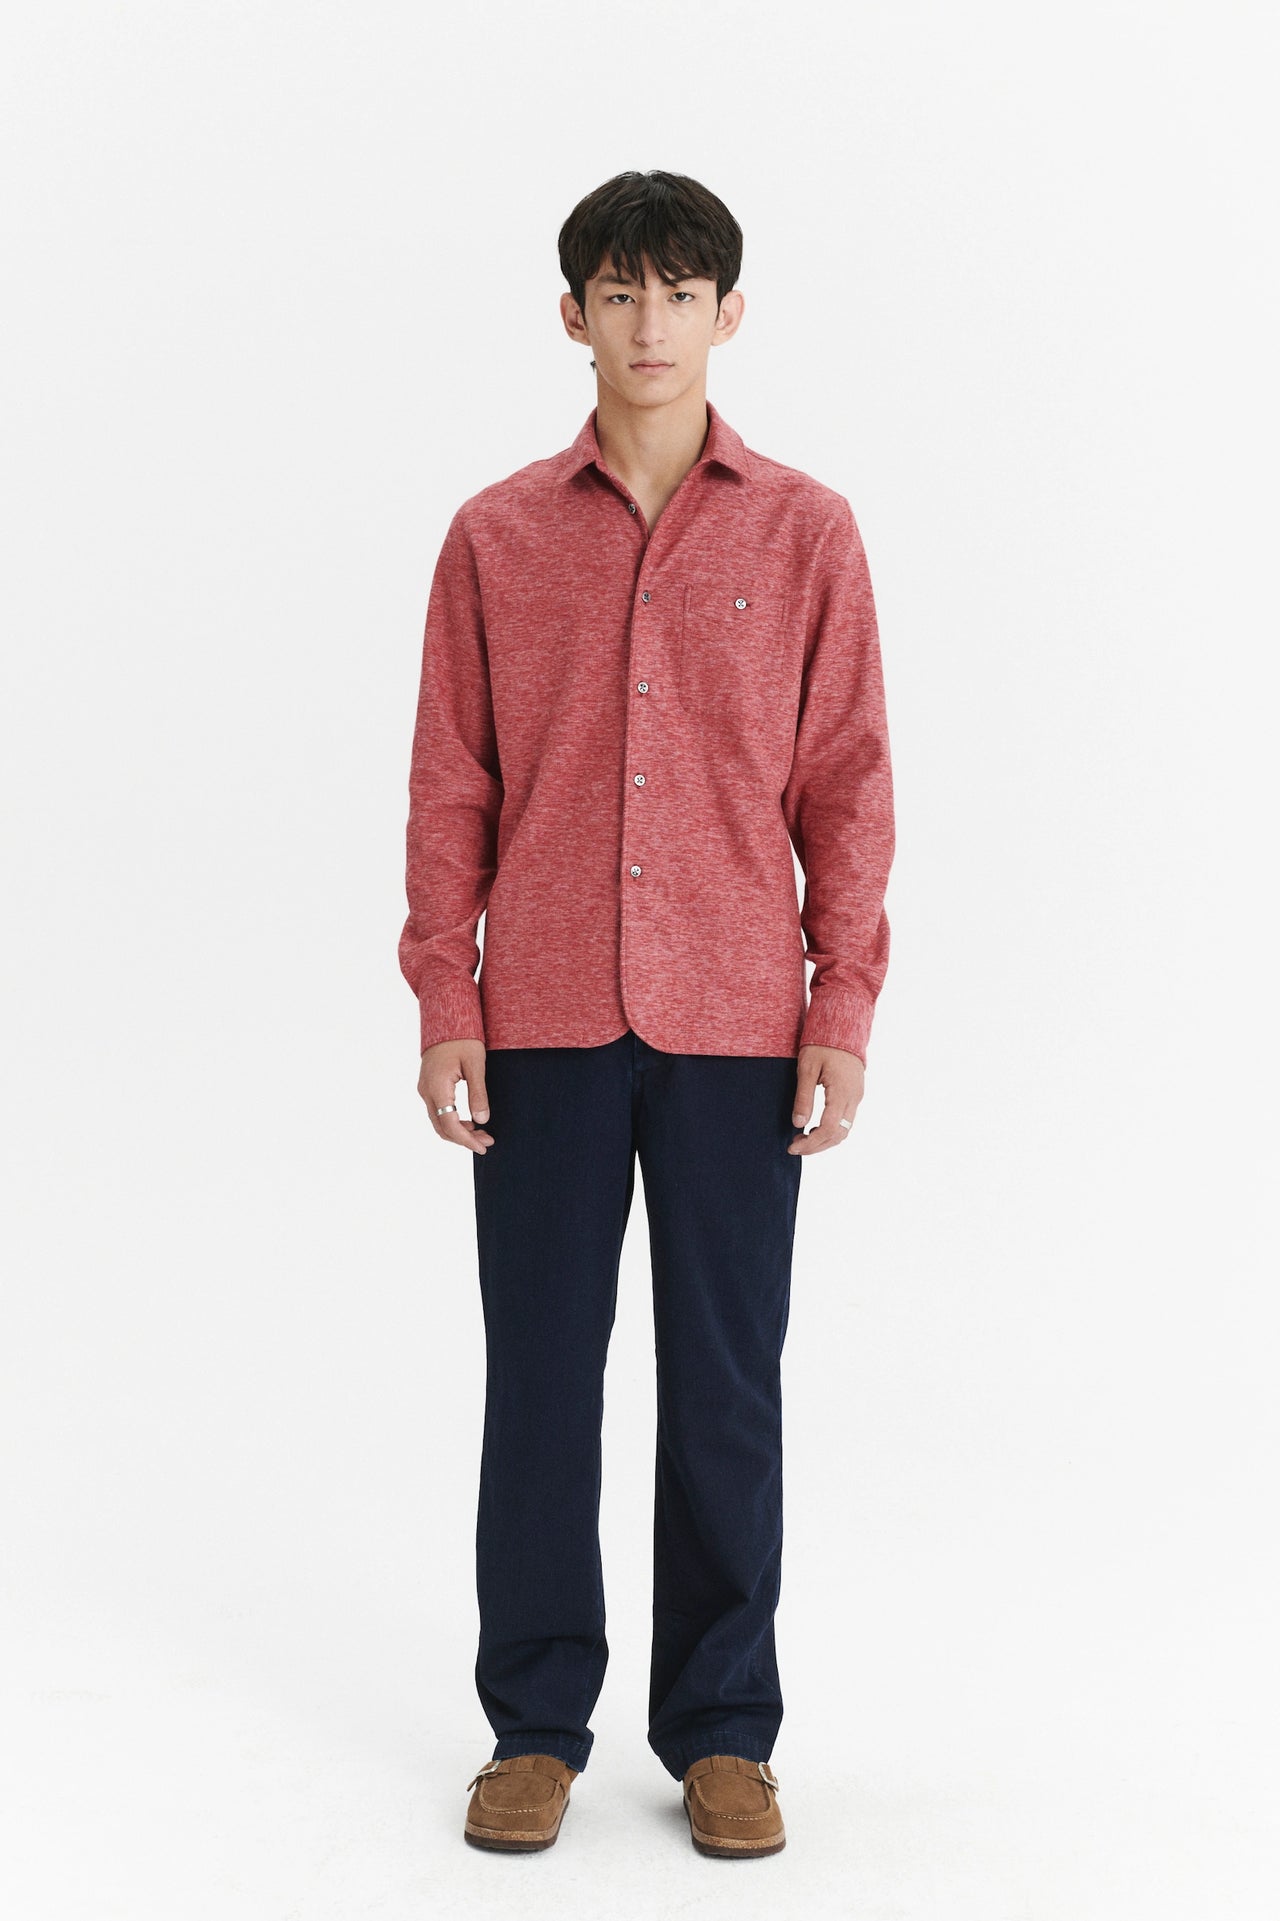 Strong Shirt in the Finest Melange Red Italian Cotton Flannel